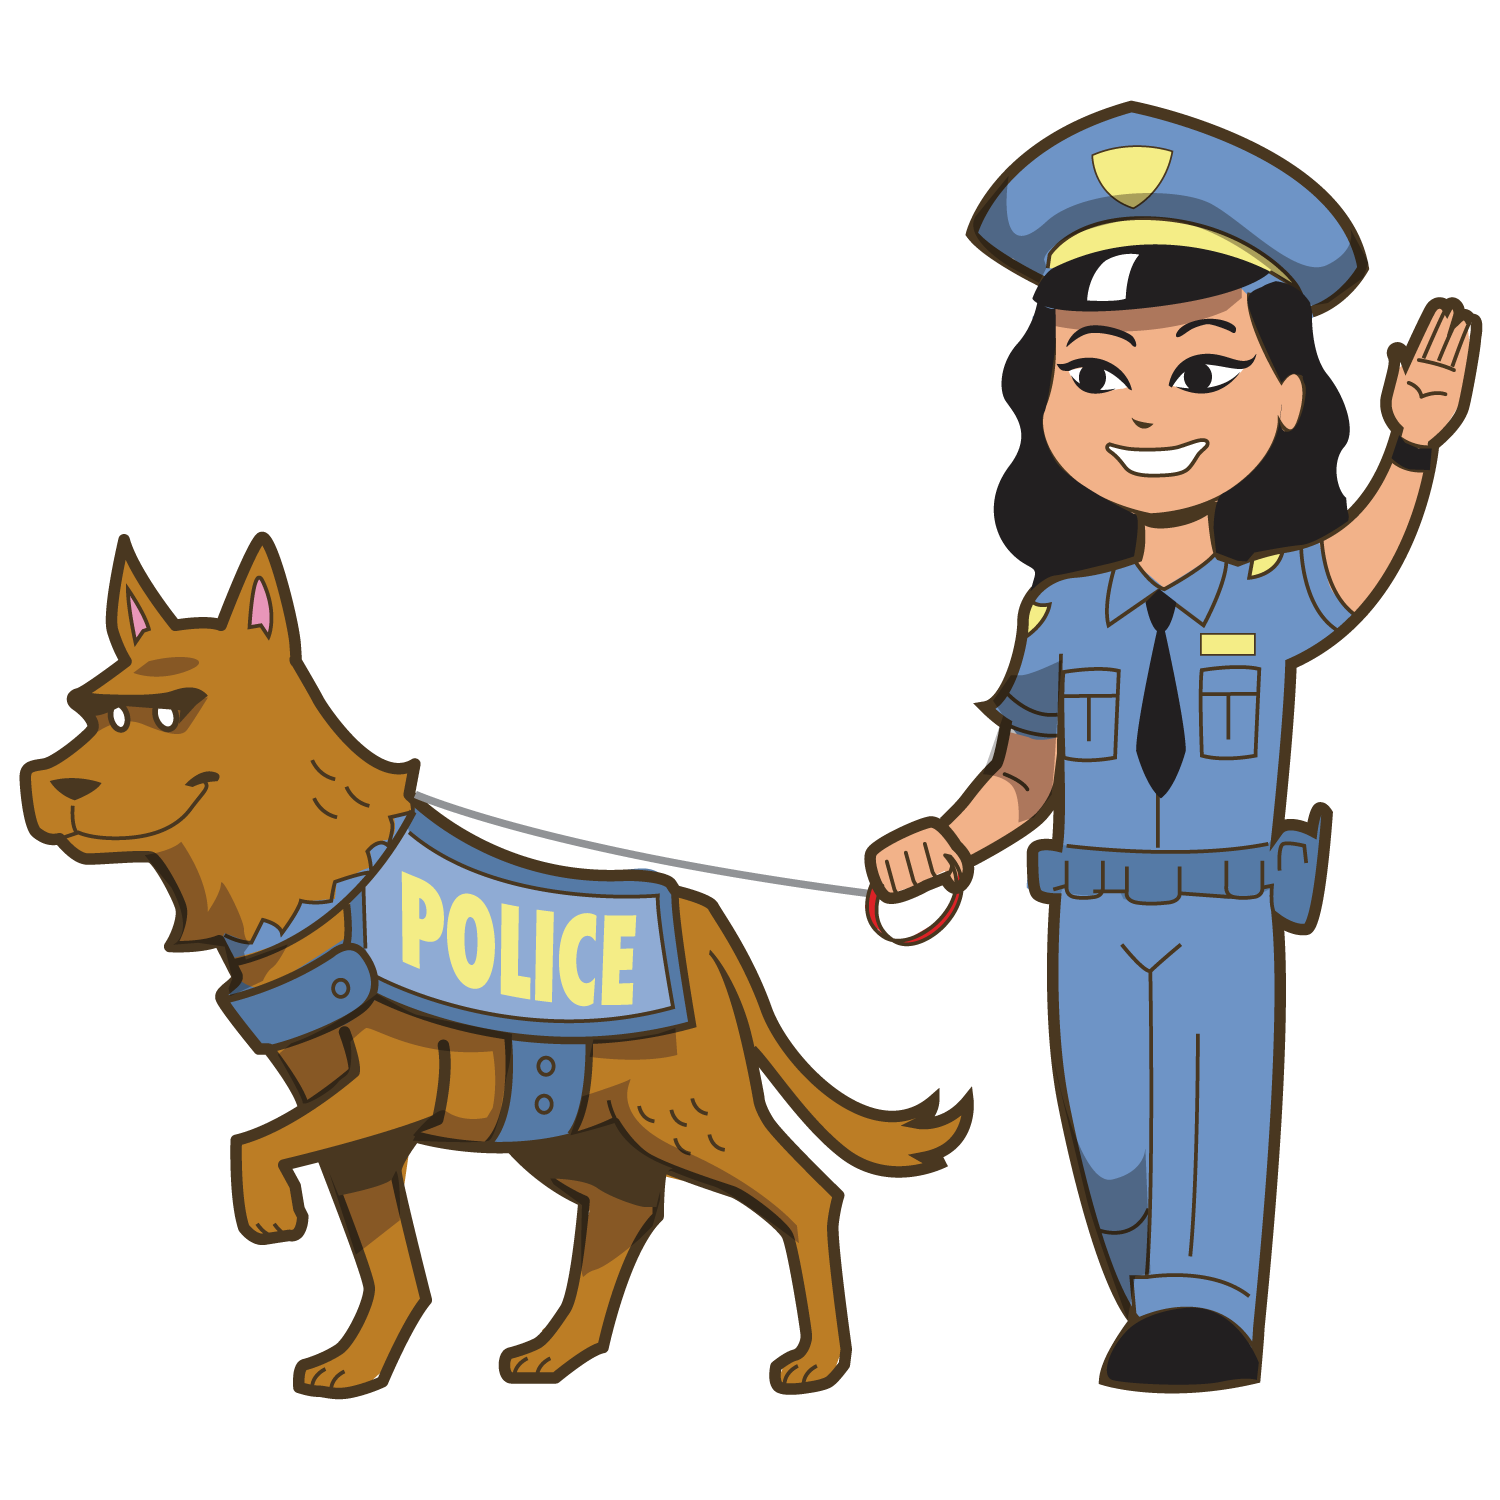 Police officer royalty free. Policeman clipart female